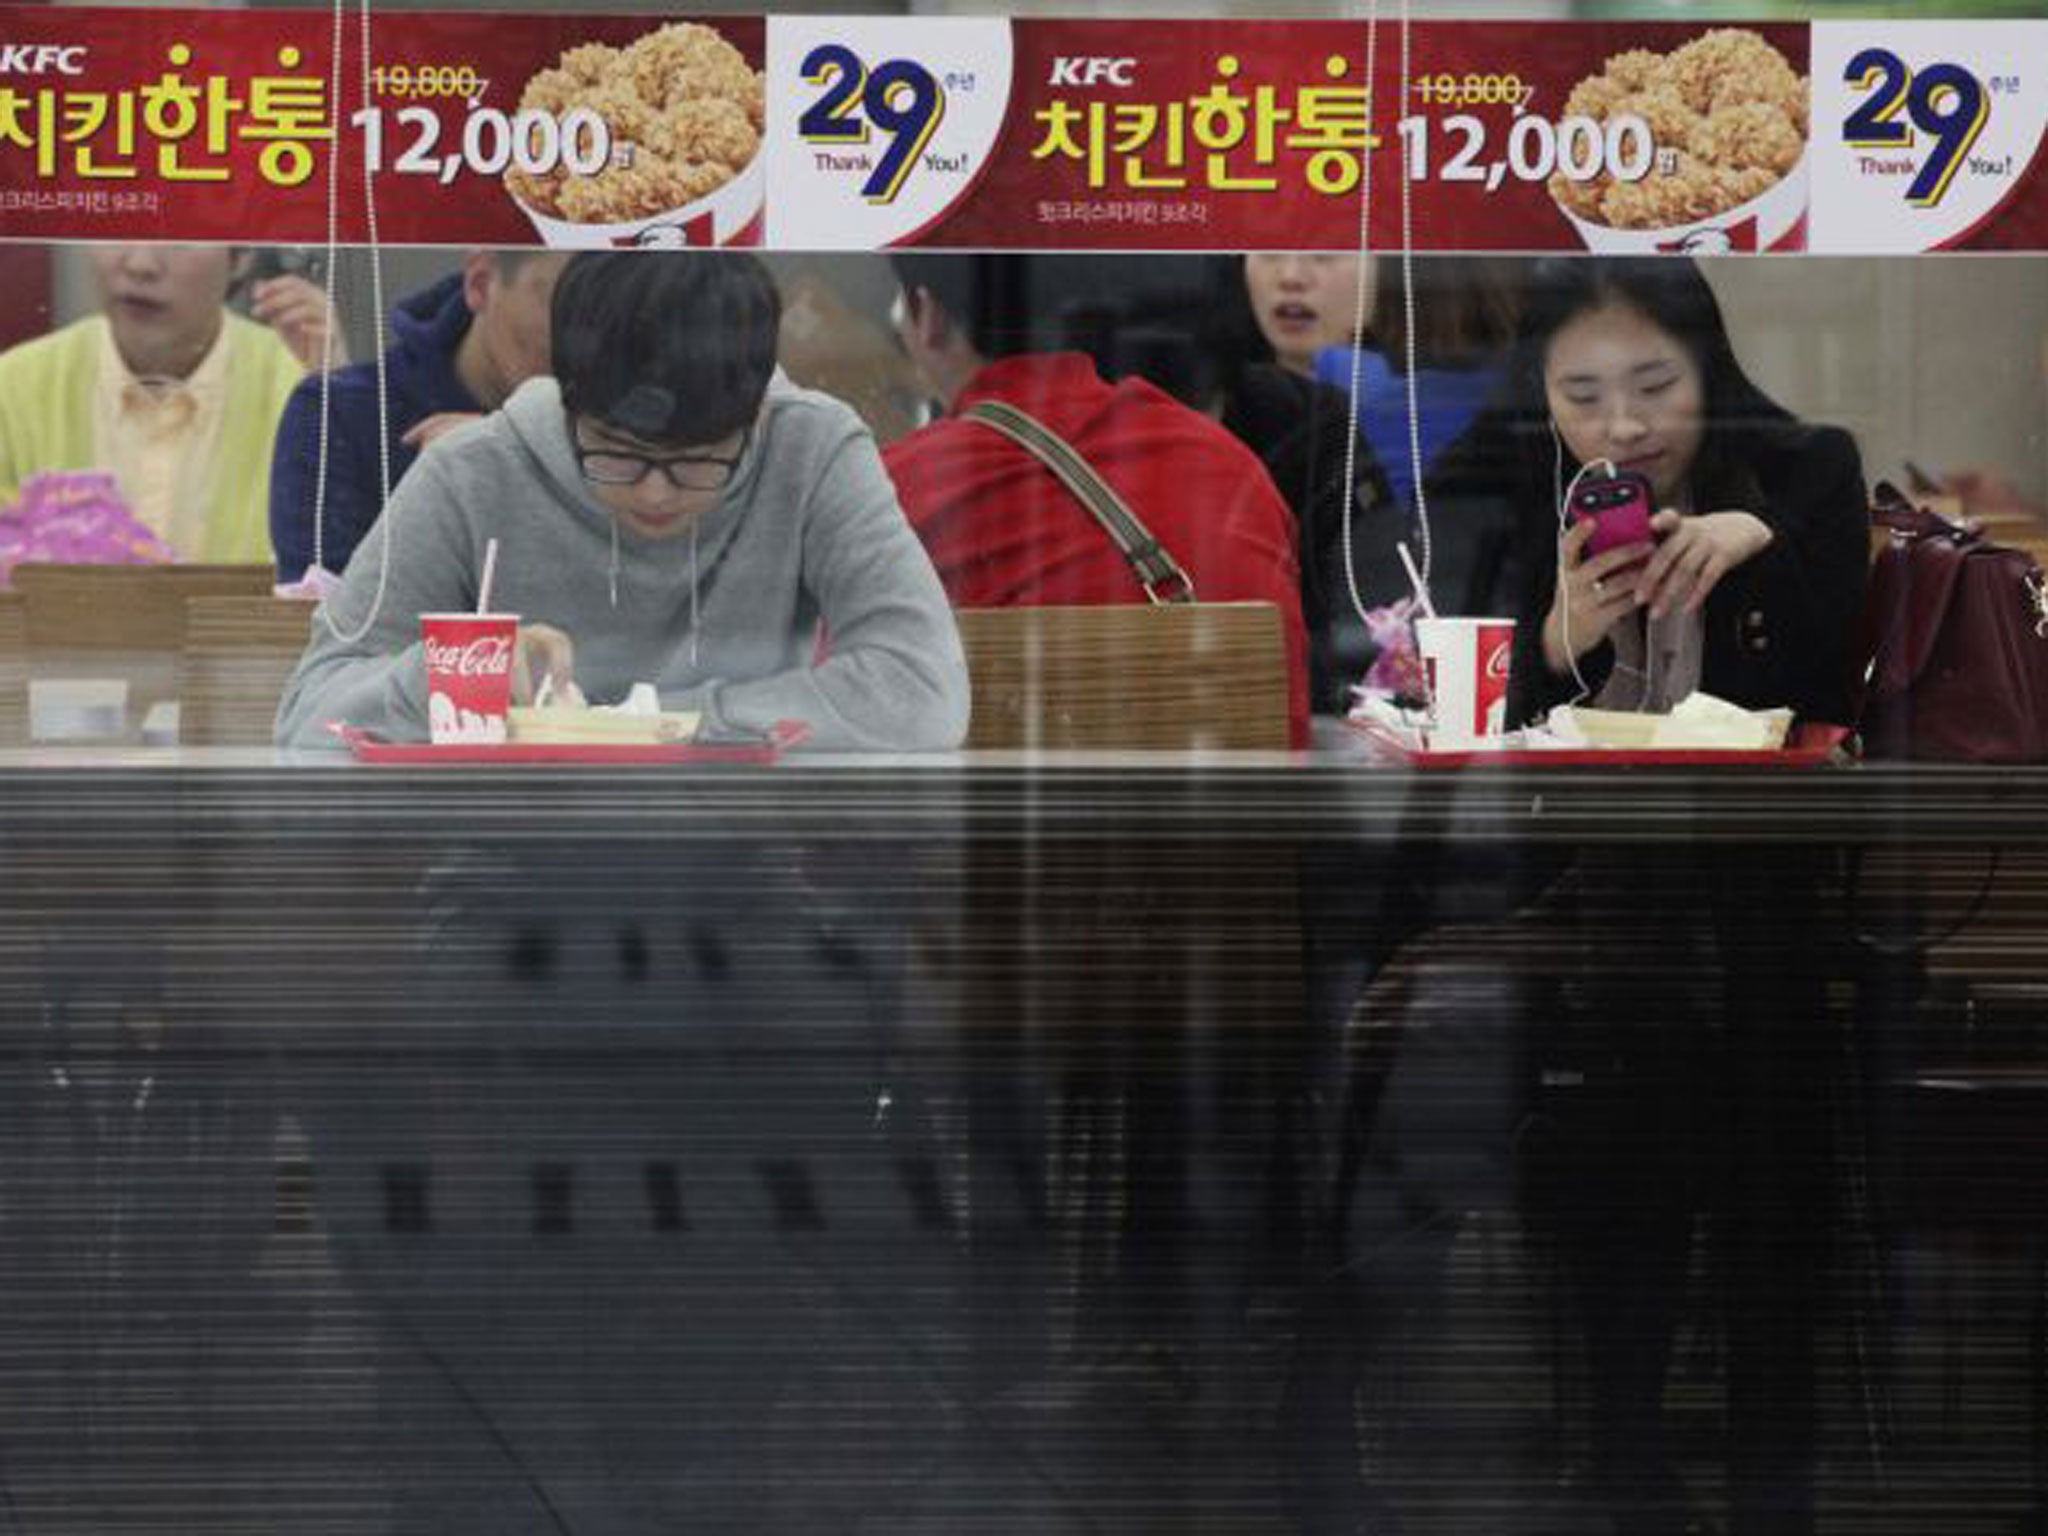 Office workers and shoppers throng the night-time streets of Seoul